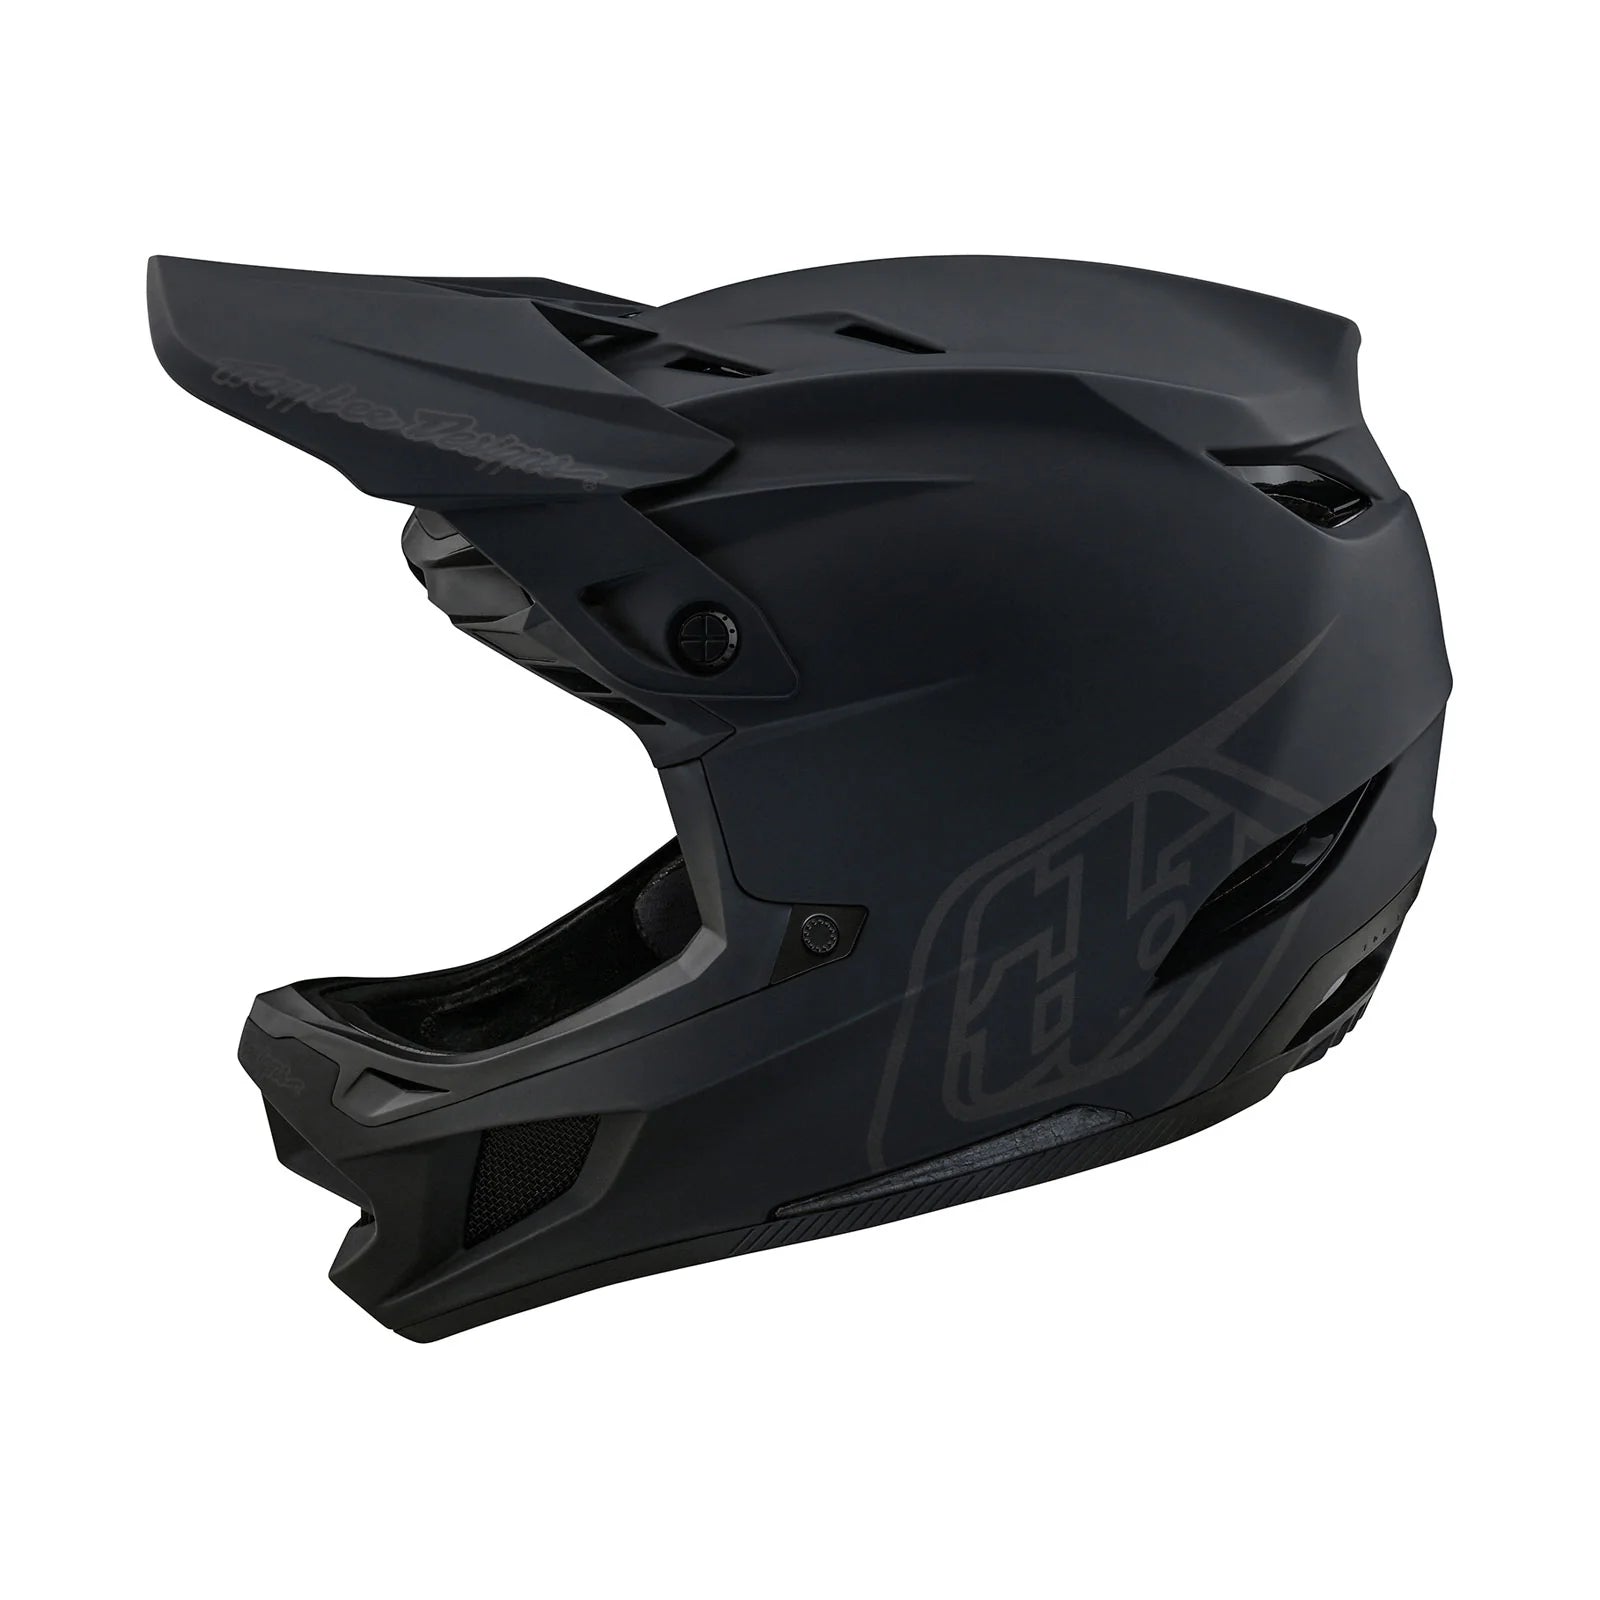 A TLD D4 AS Composite helmet W/MIPS Stealth Black on a white background.